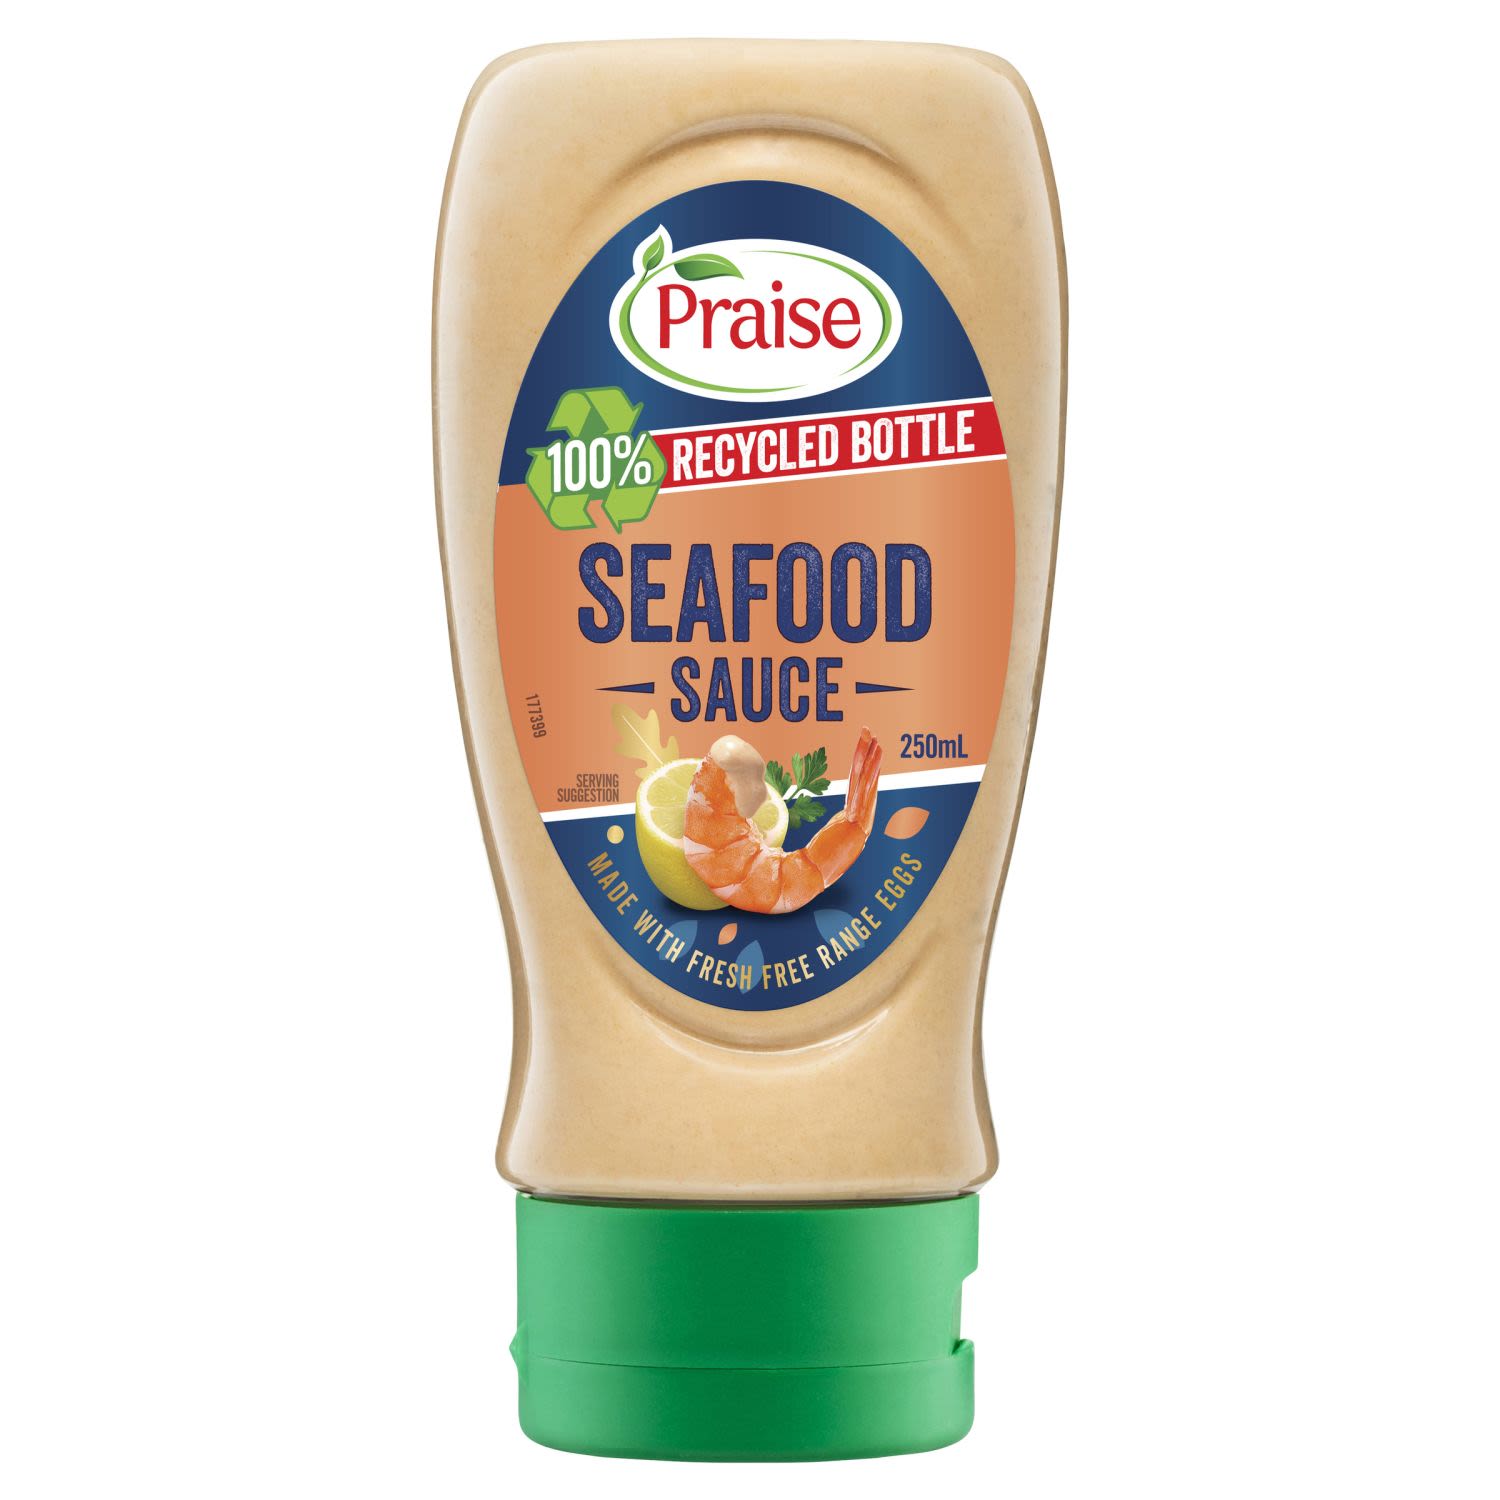 Praise Seafood Sauce is a great way to finish all your seafood recipes. Whether you're having a crunchy, juicy tempura, oysters, fresh prawns or a fancy lobster mornay, this sauce is sure to make every bite extra delicious. You can even use it to dress up a seafood salad. Made with no artificial colours or flavours, this is a must-have for your next seafood meal.<br /> <br /><br />Allergen may be present: Barley|Egg|Fish|Wheat|Gluten Containing Cereals